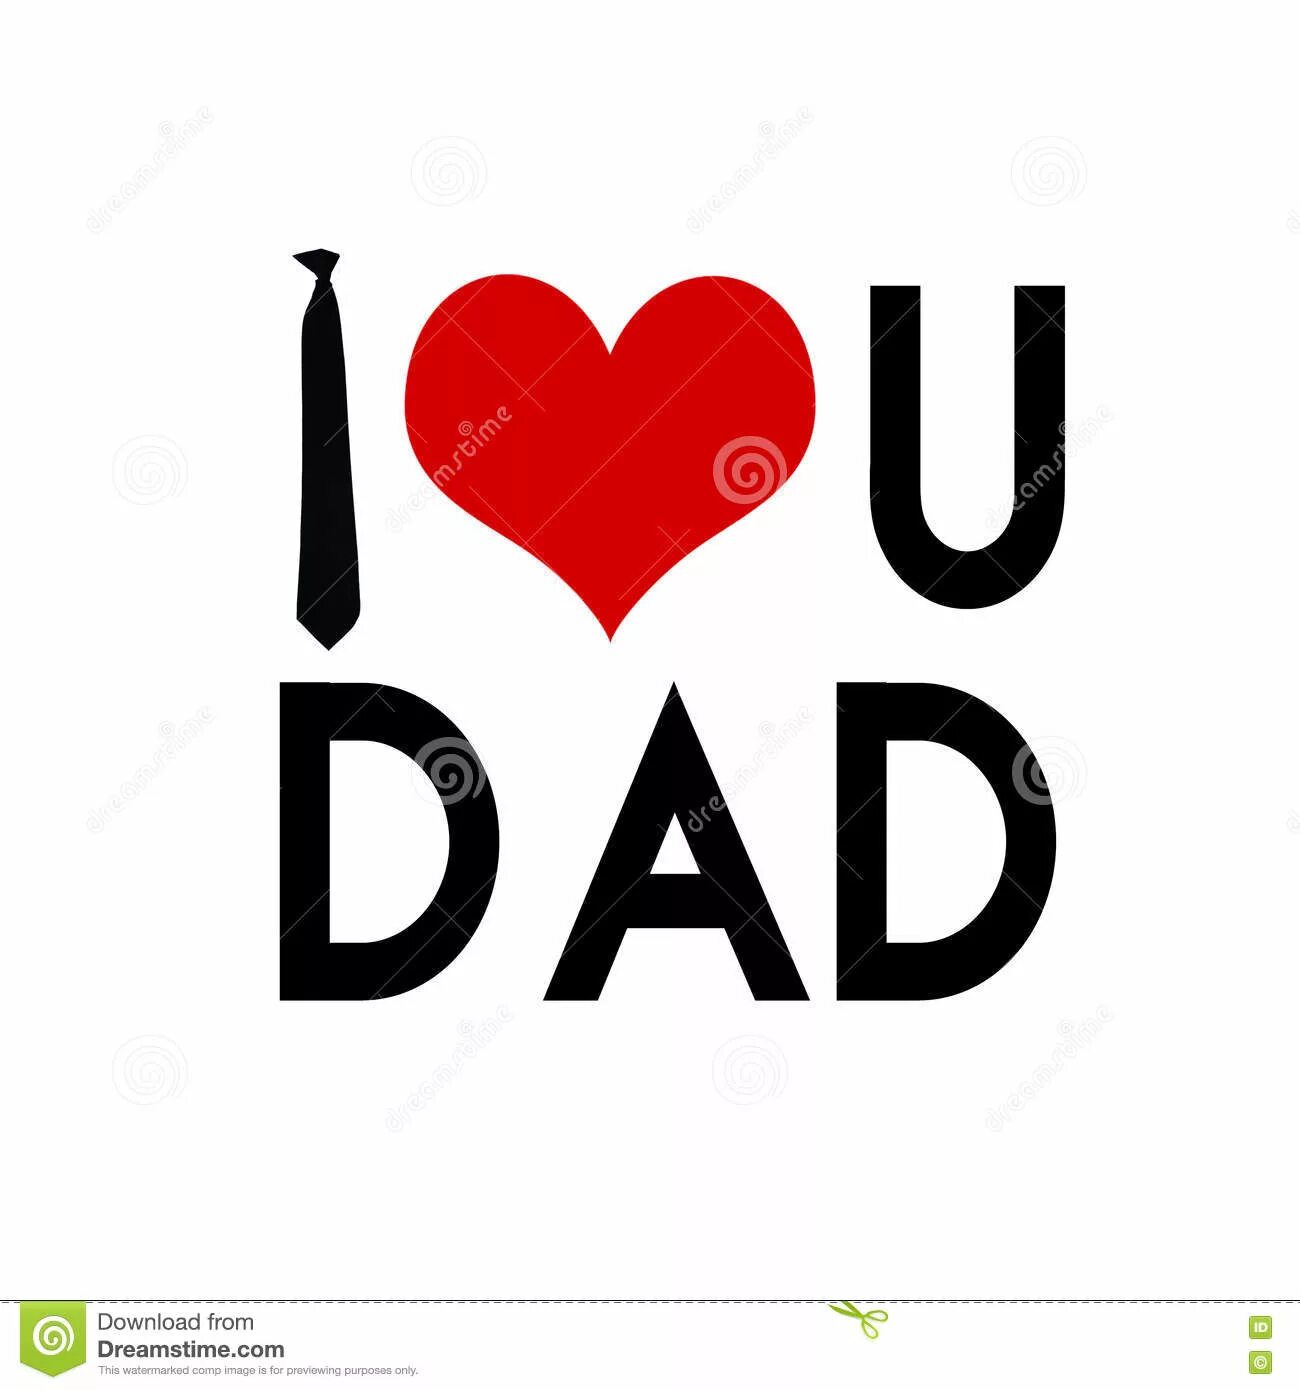 T t i love you daddy. I Love you dad. Надпись i Love dad. I Love you dad одежда. I Love you Daddy картинки.